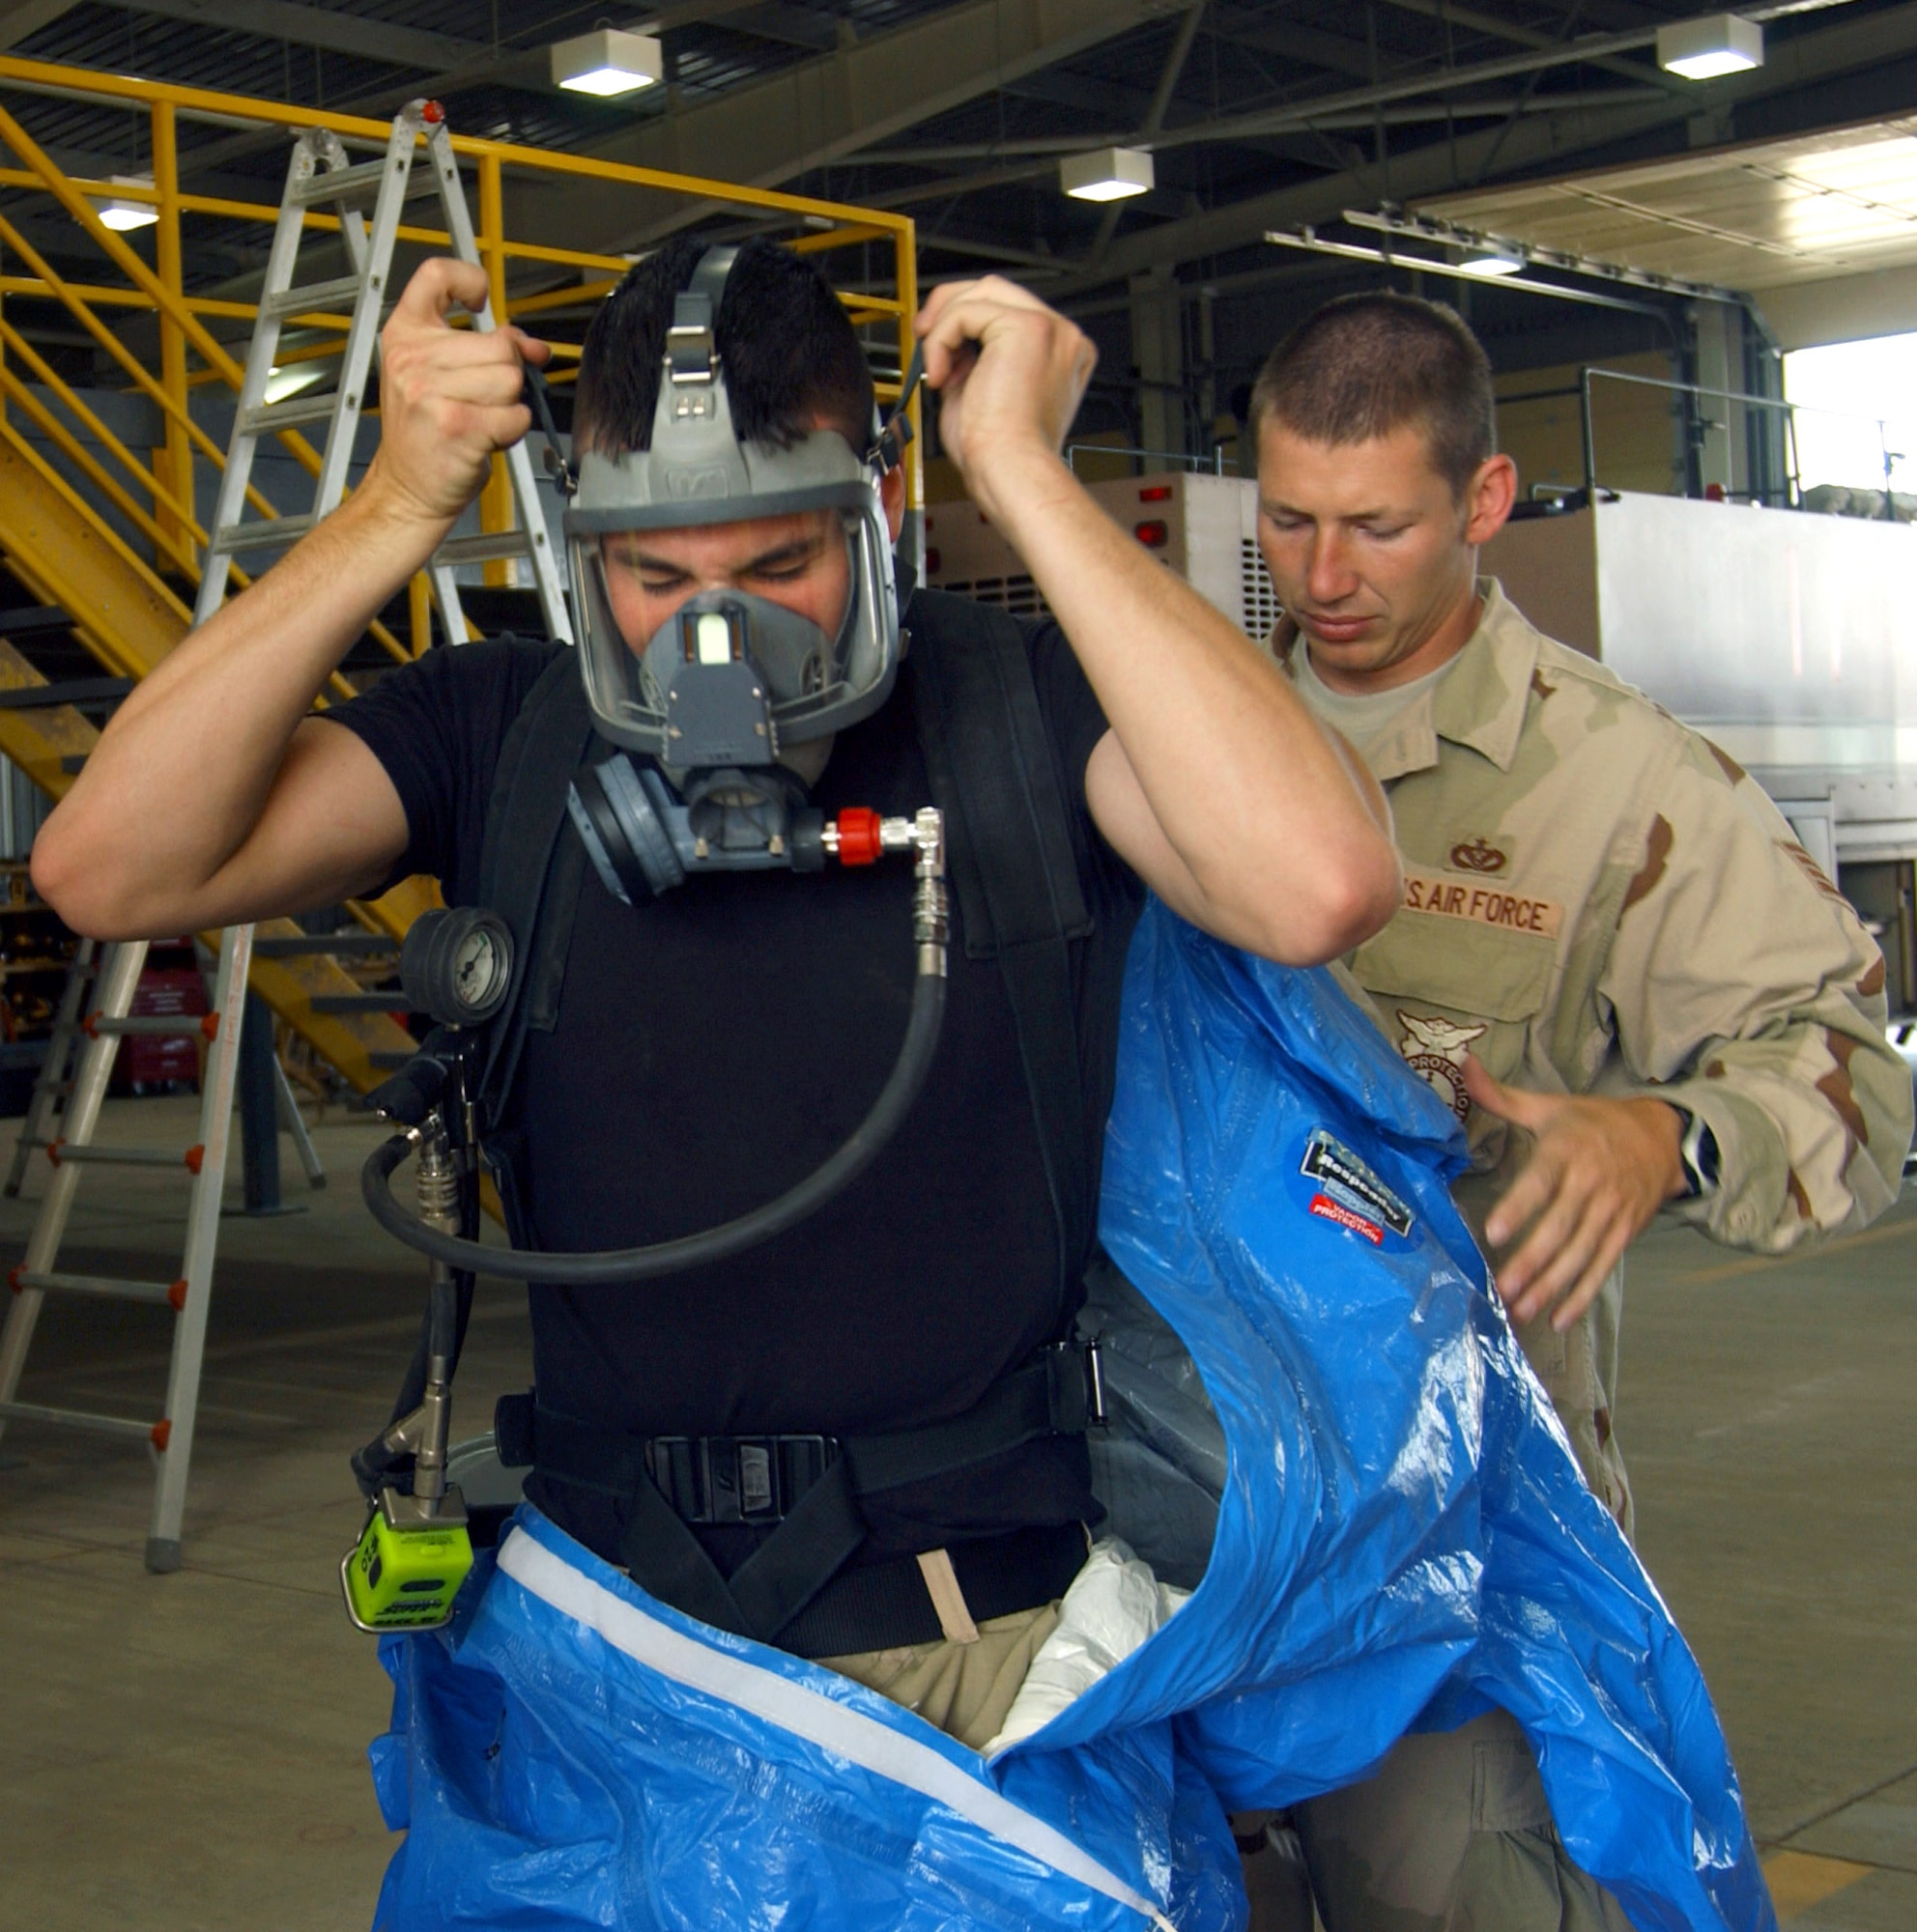 Staff Sgt. Ryan Roxburgh helps Airman 1st Class Glenn Rodgers put on a blue Level A suit to simulate a chemically contaminated firefighter during a training exercise June 5 at Balad Air Base, Iraq. The firefighters set up a hazardous-material decontamination line and practiced so that they would be able to quickly respond to any real-world threat within 10 minutes. The Airmen are firefighters with the 332nd Expeditionary Civil Engineer Squadron Fire and Emergency Services Flight.  (U.S. Air Force photo/1st Lt. Shannon Collins)